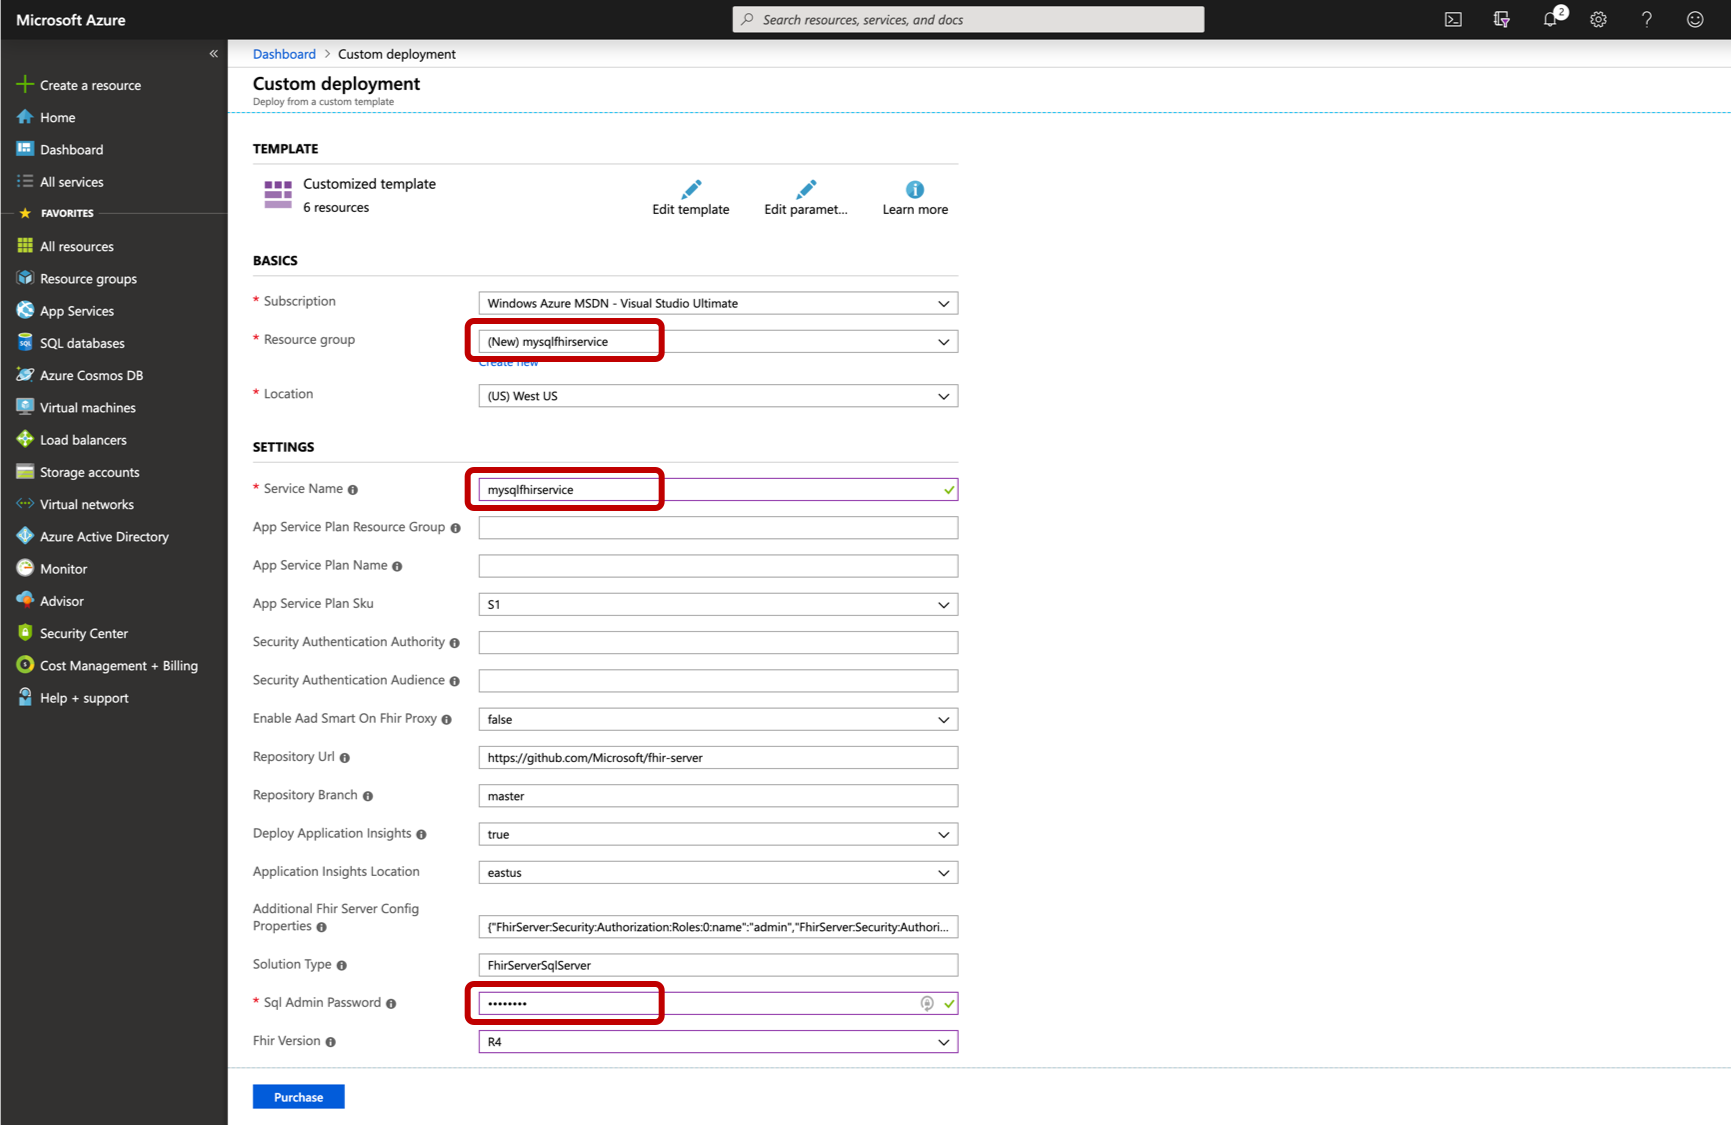 Azure Resource Manager template for deploying the FHIR server wirh a SQL persistence provider